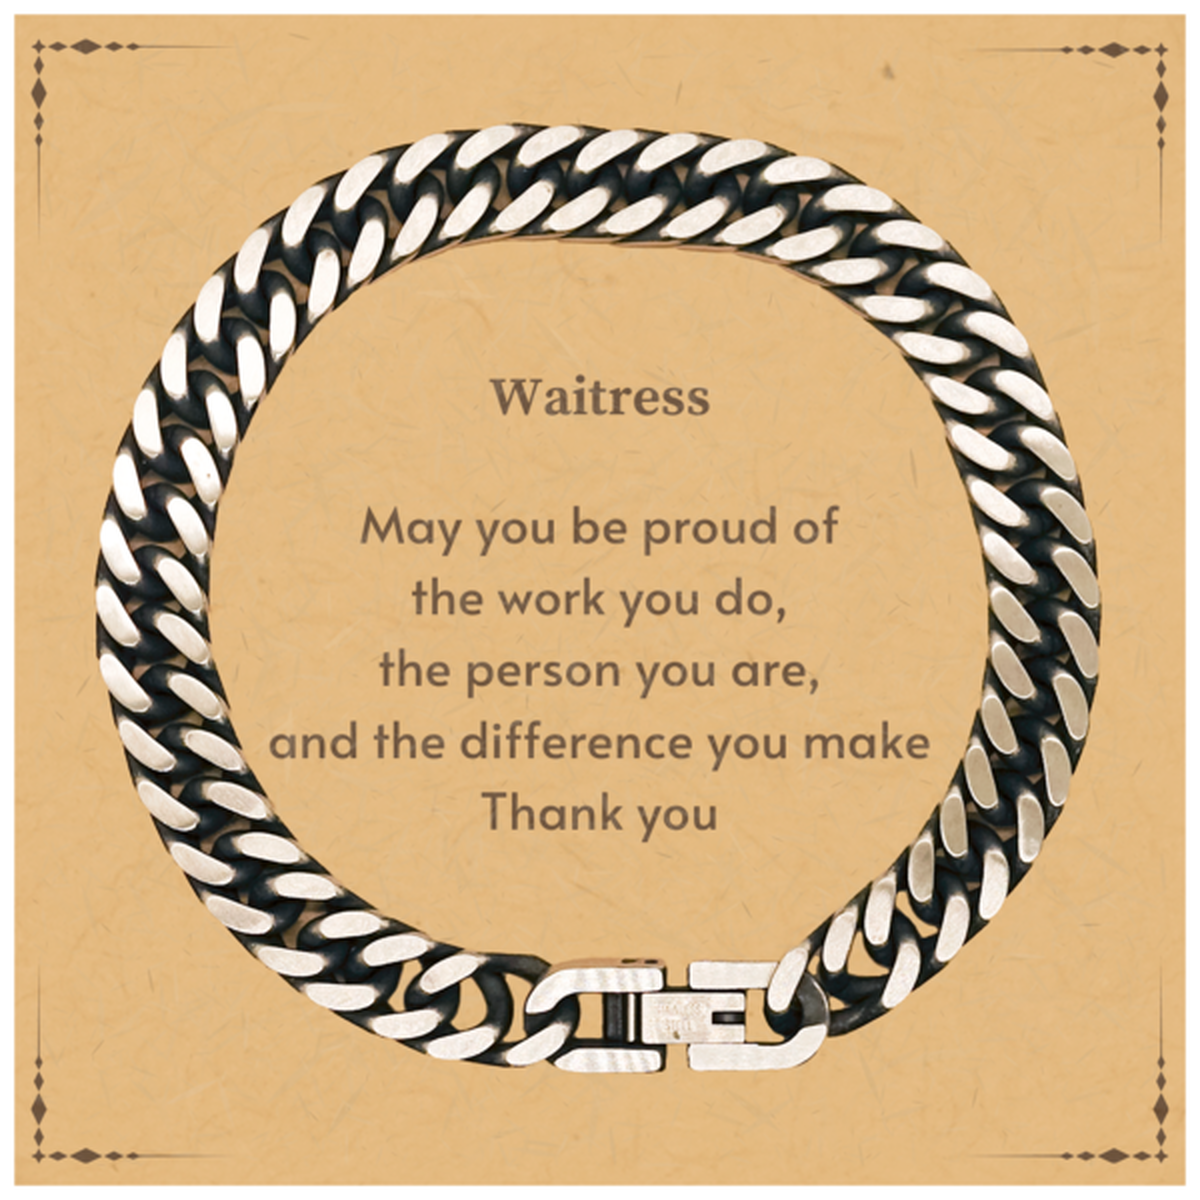 Heartwarming Cuban Link Chain Bracelet Retirement Coworkers Gifts for Waitress, Waitress May You be proud of the work you do, the person you are Gifts for Boss Men Women Friends